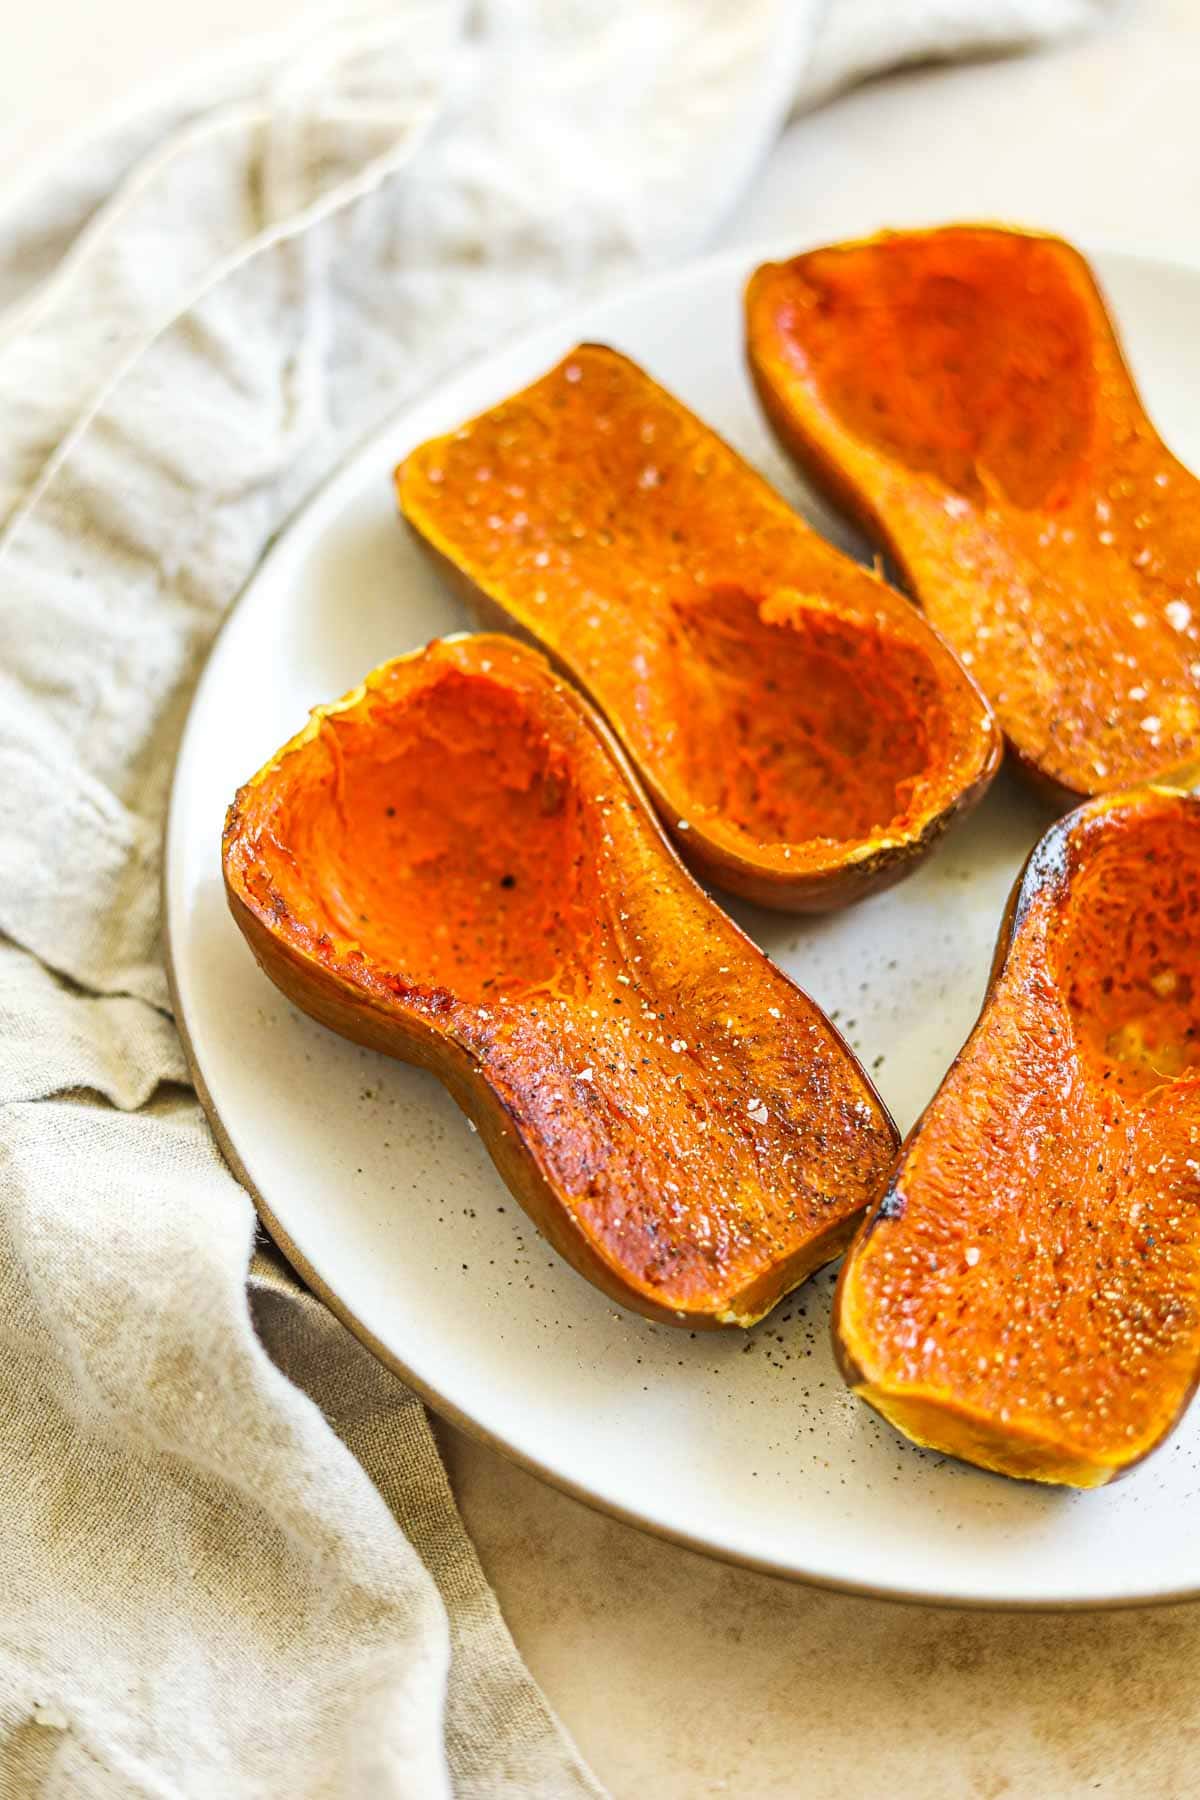 Roasted honeynut squash with salt and pepper arranged on a serving plate.